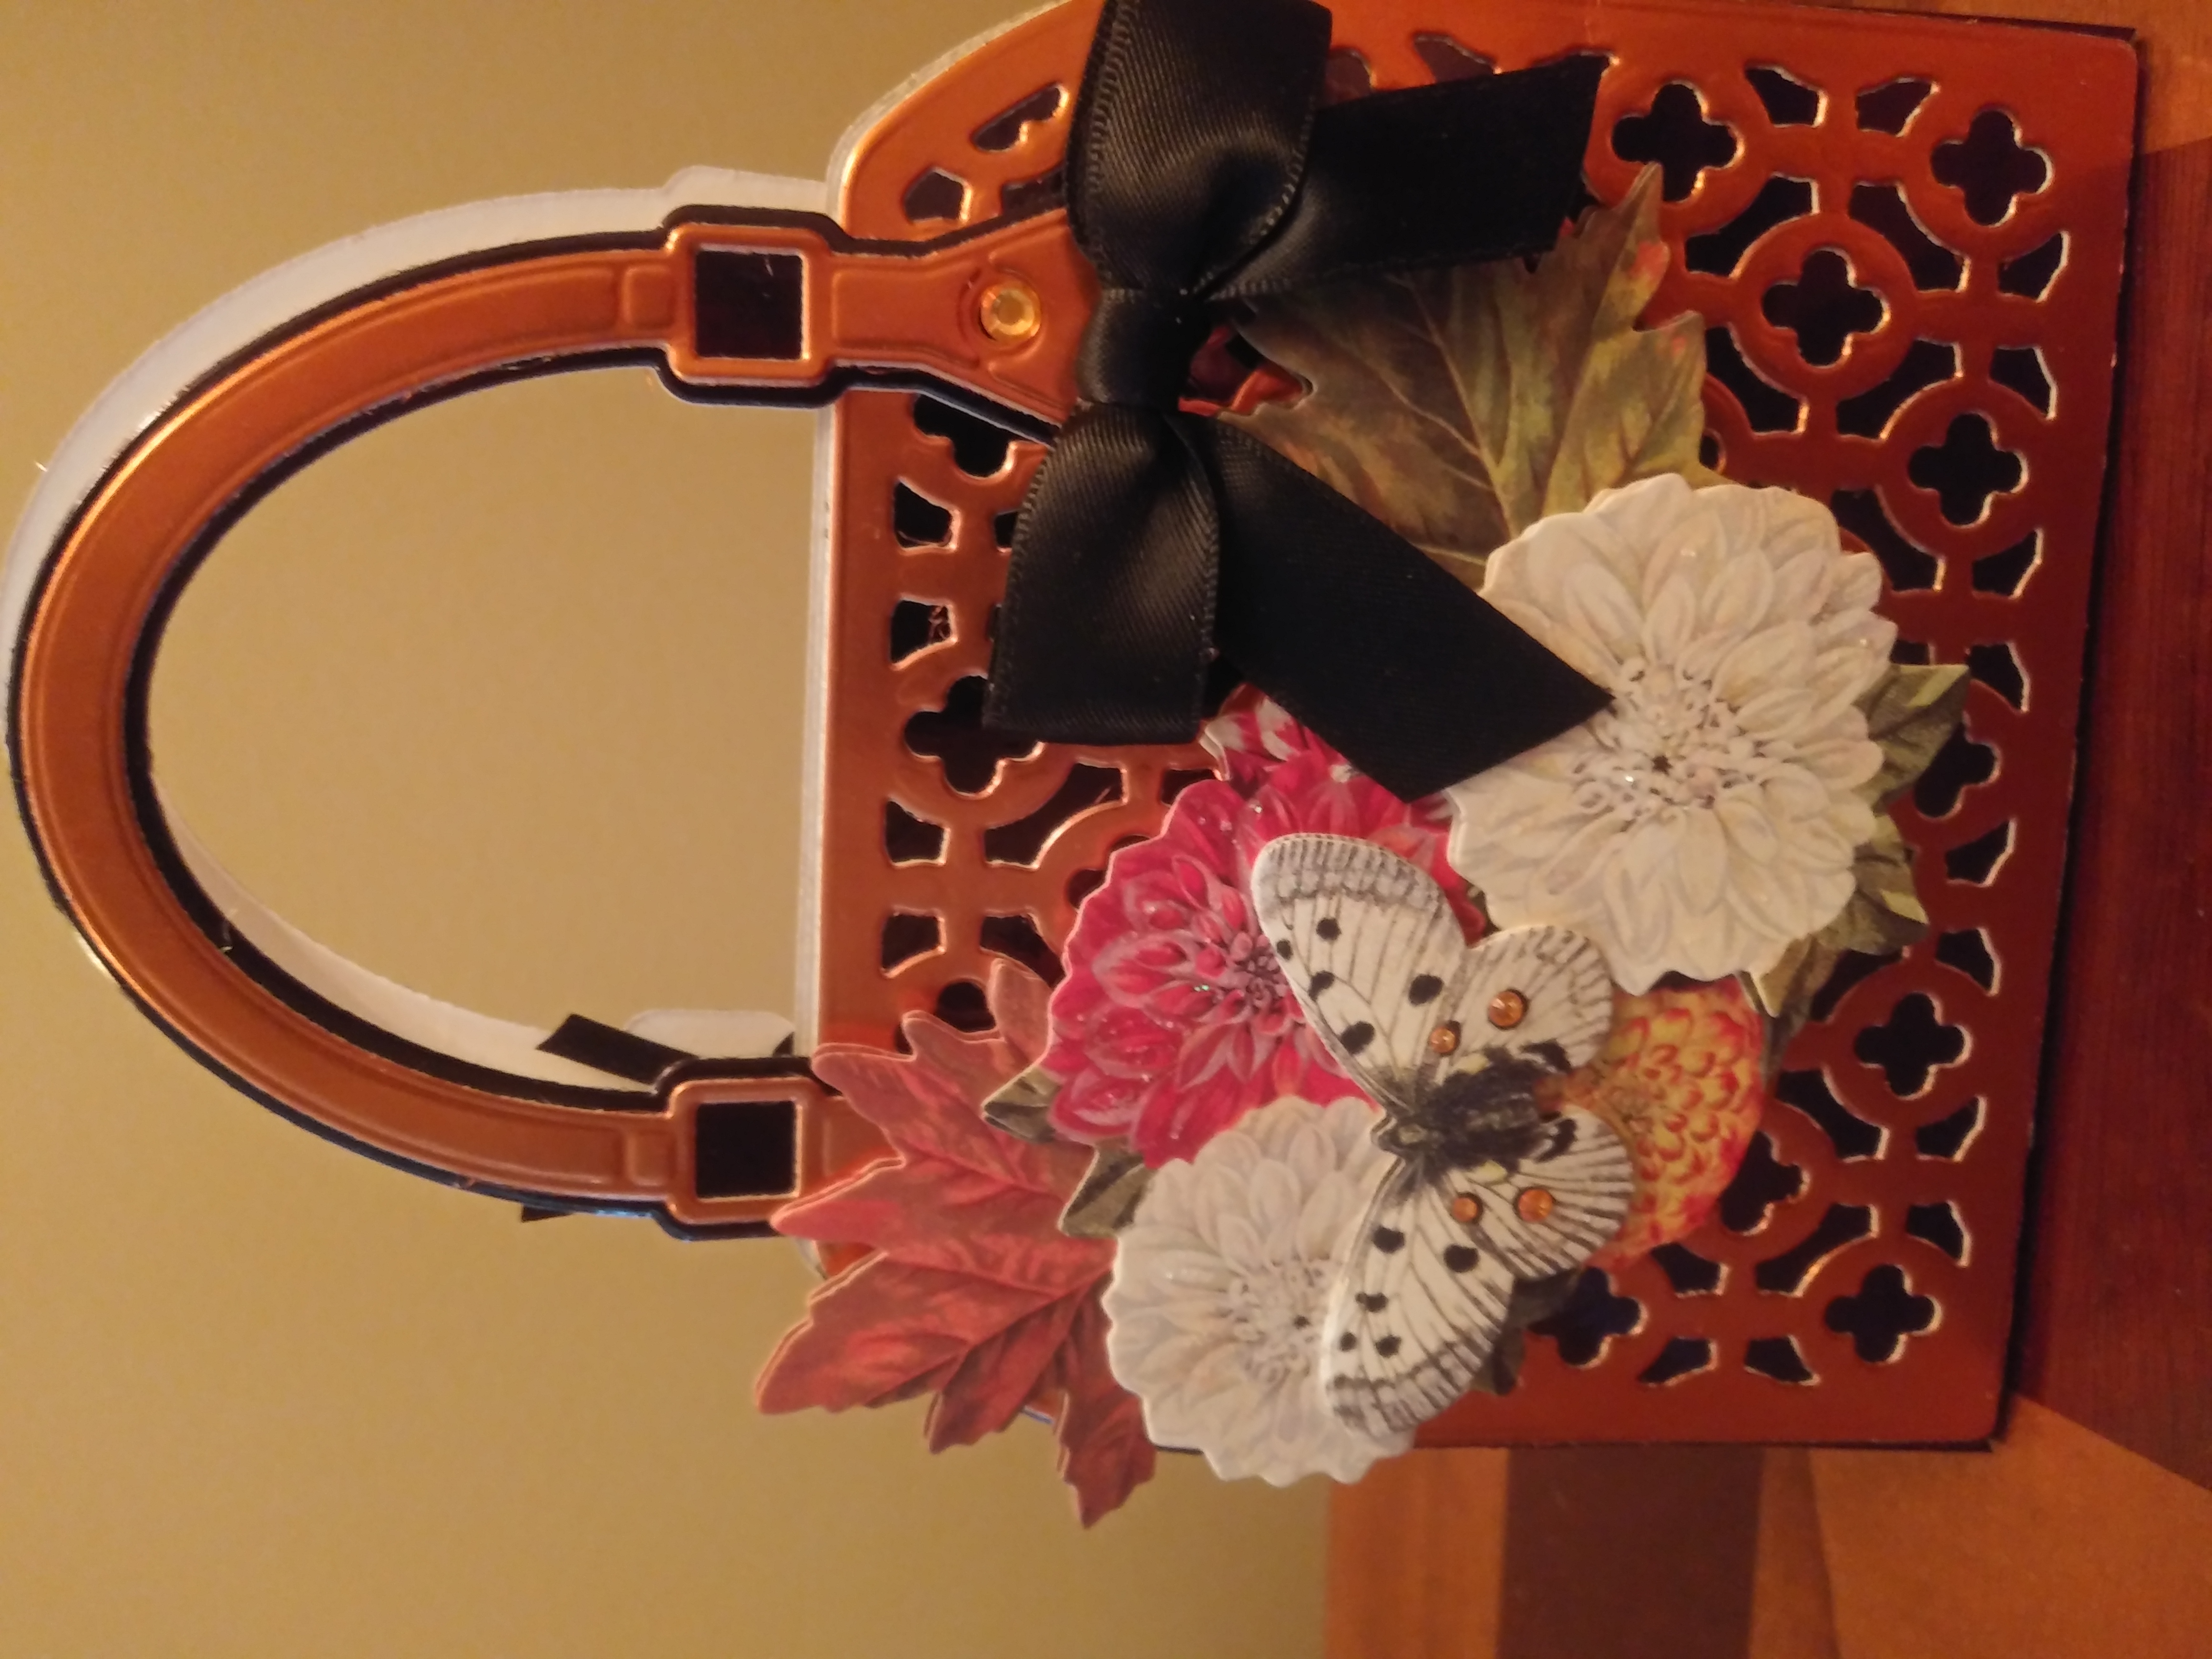 A handbag decorated with flowers and butterflies.